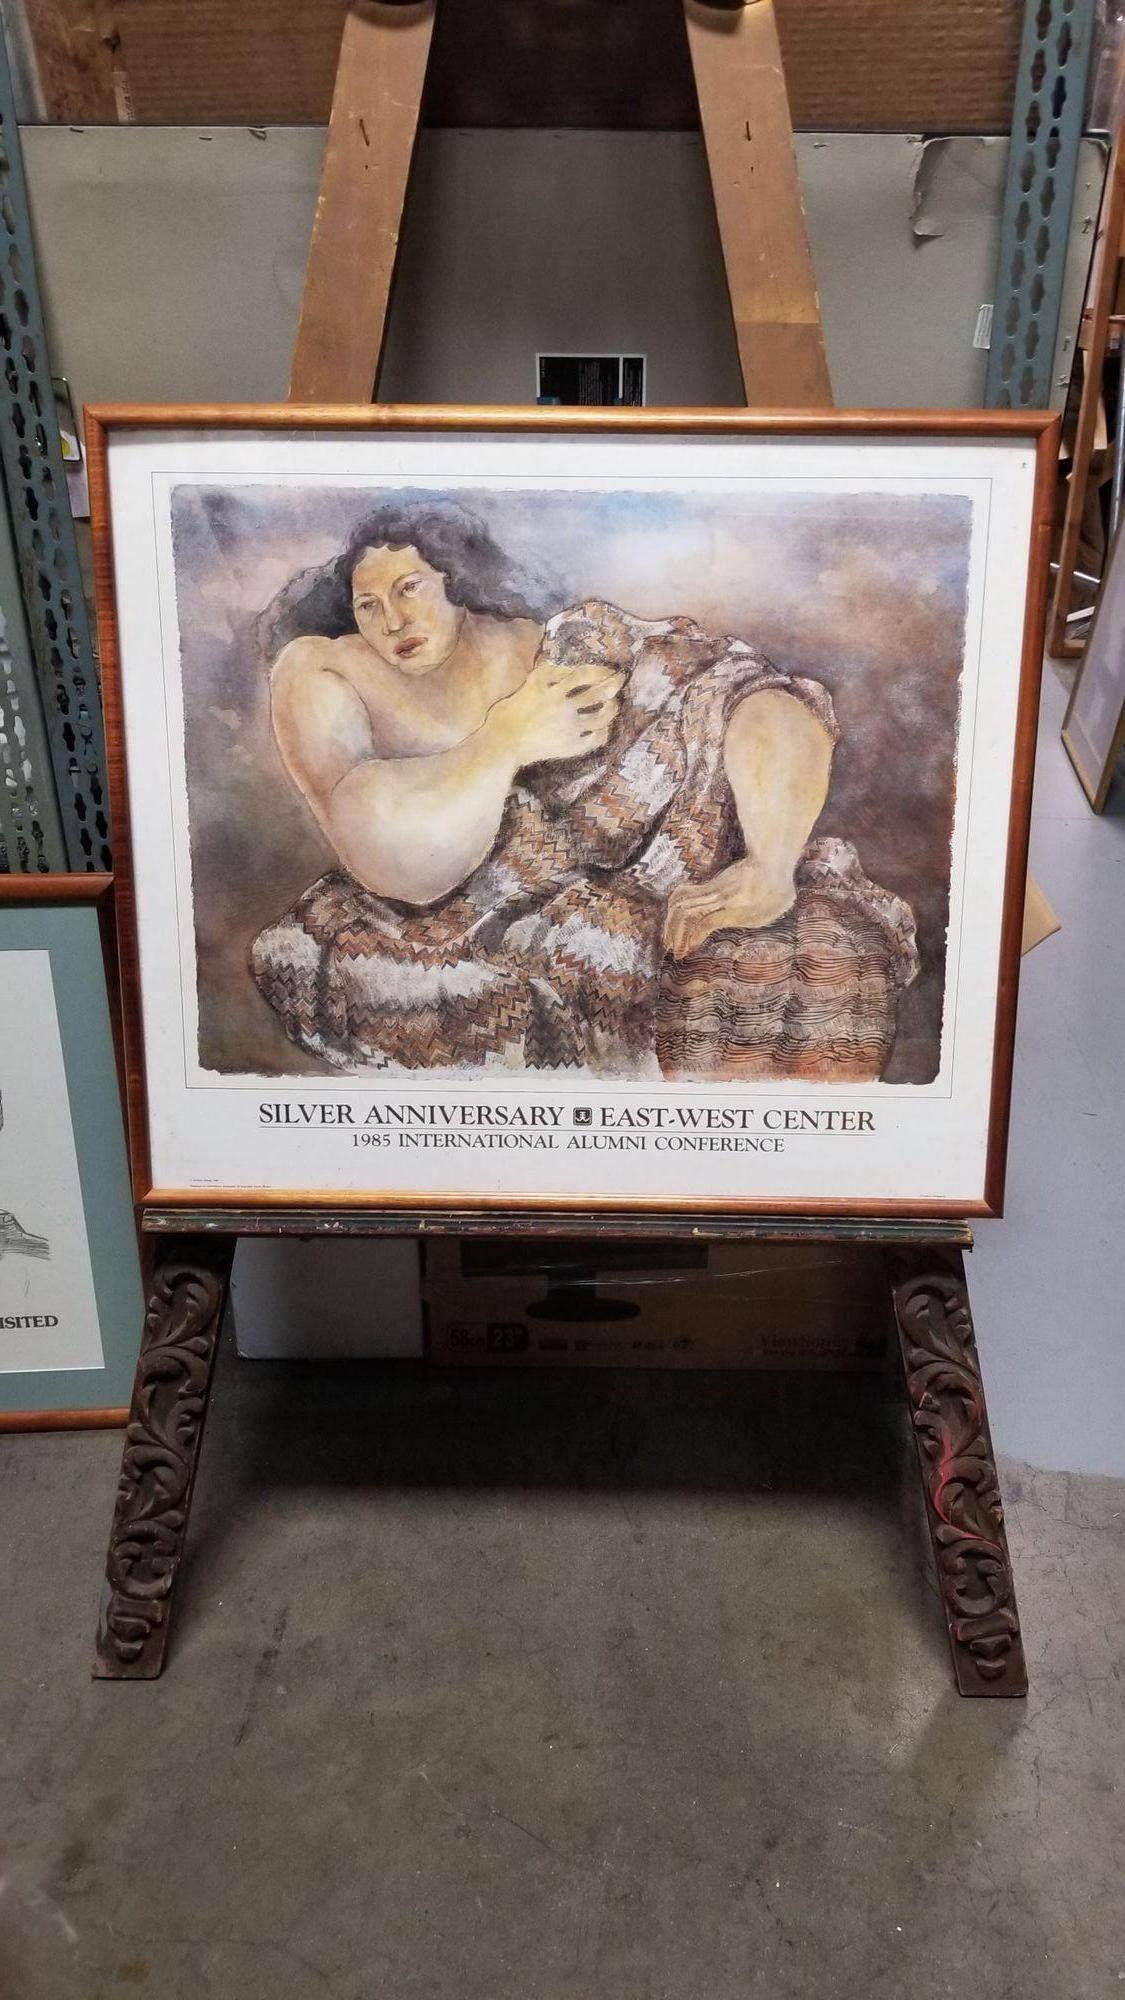 Hawaiian artwork print Poster Silver 20th Anniversary East-West Center at the University of Hawaii International Conference. The poster features a painting by Artist Yevonne Cheung featuring a watercolor portrait of young women.

The print is in its